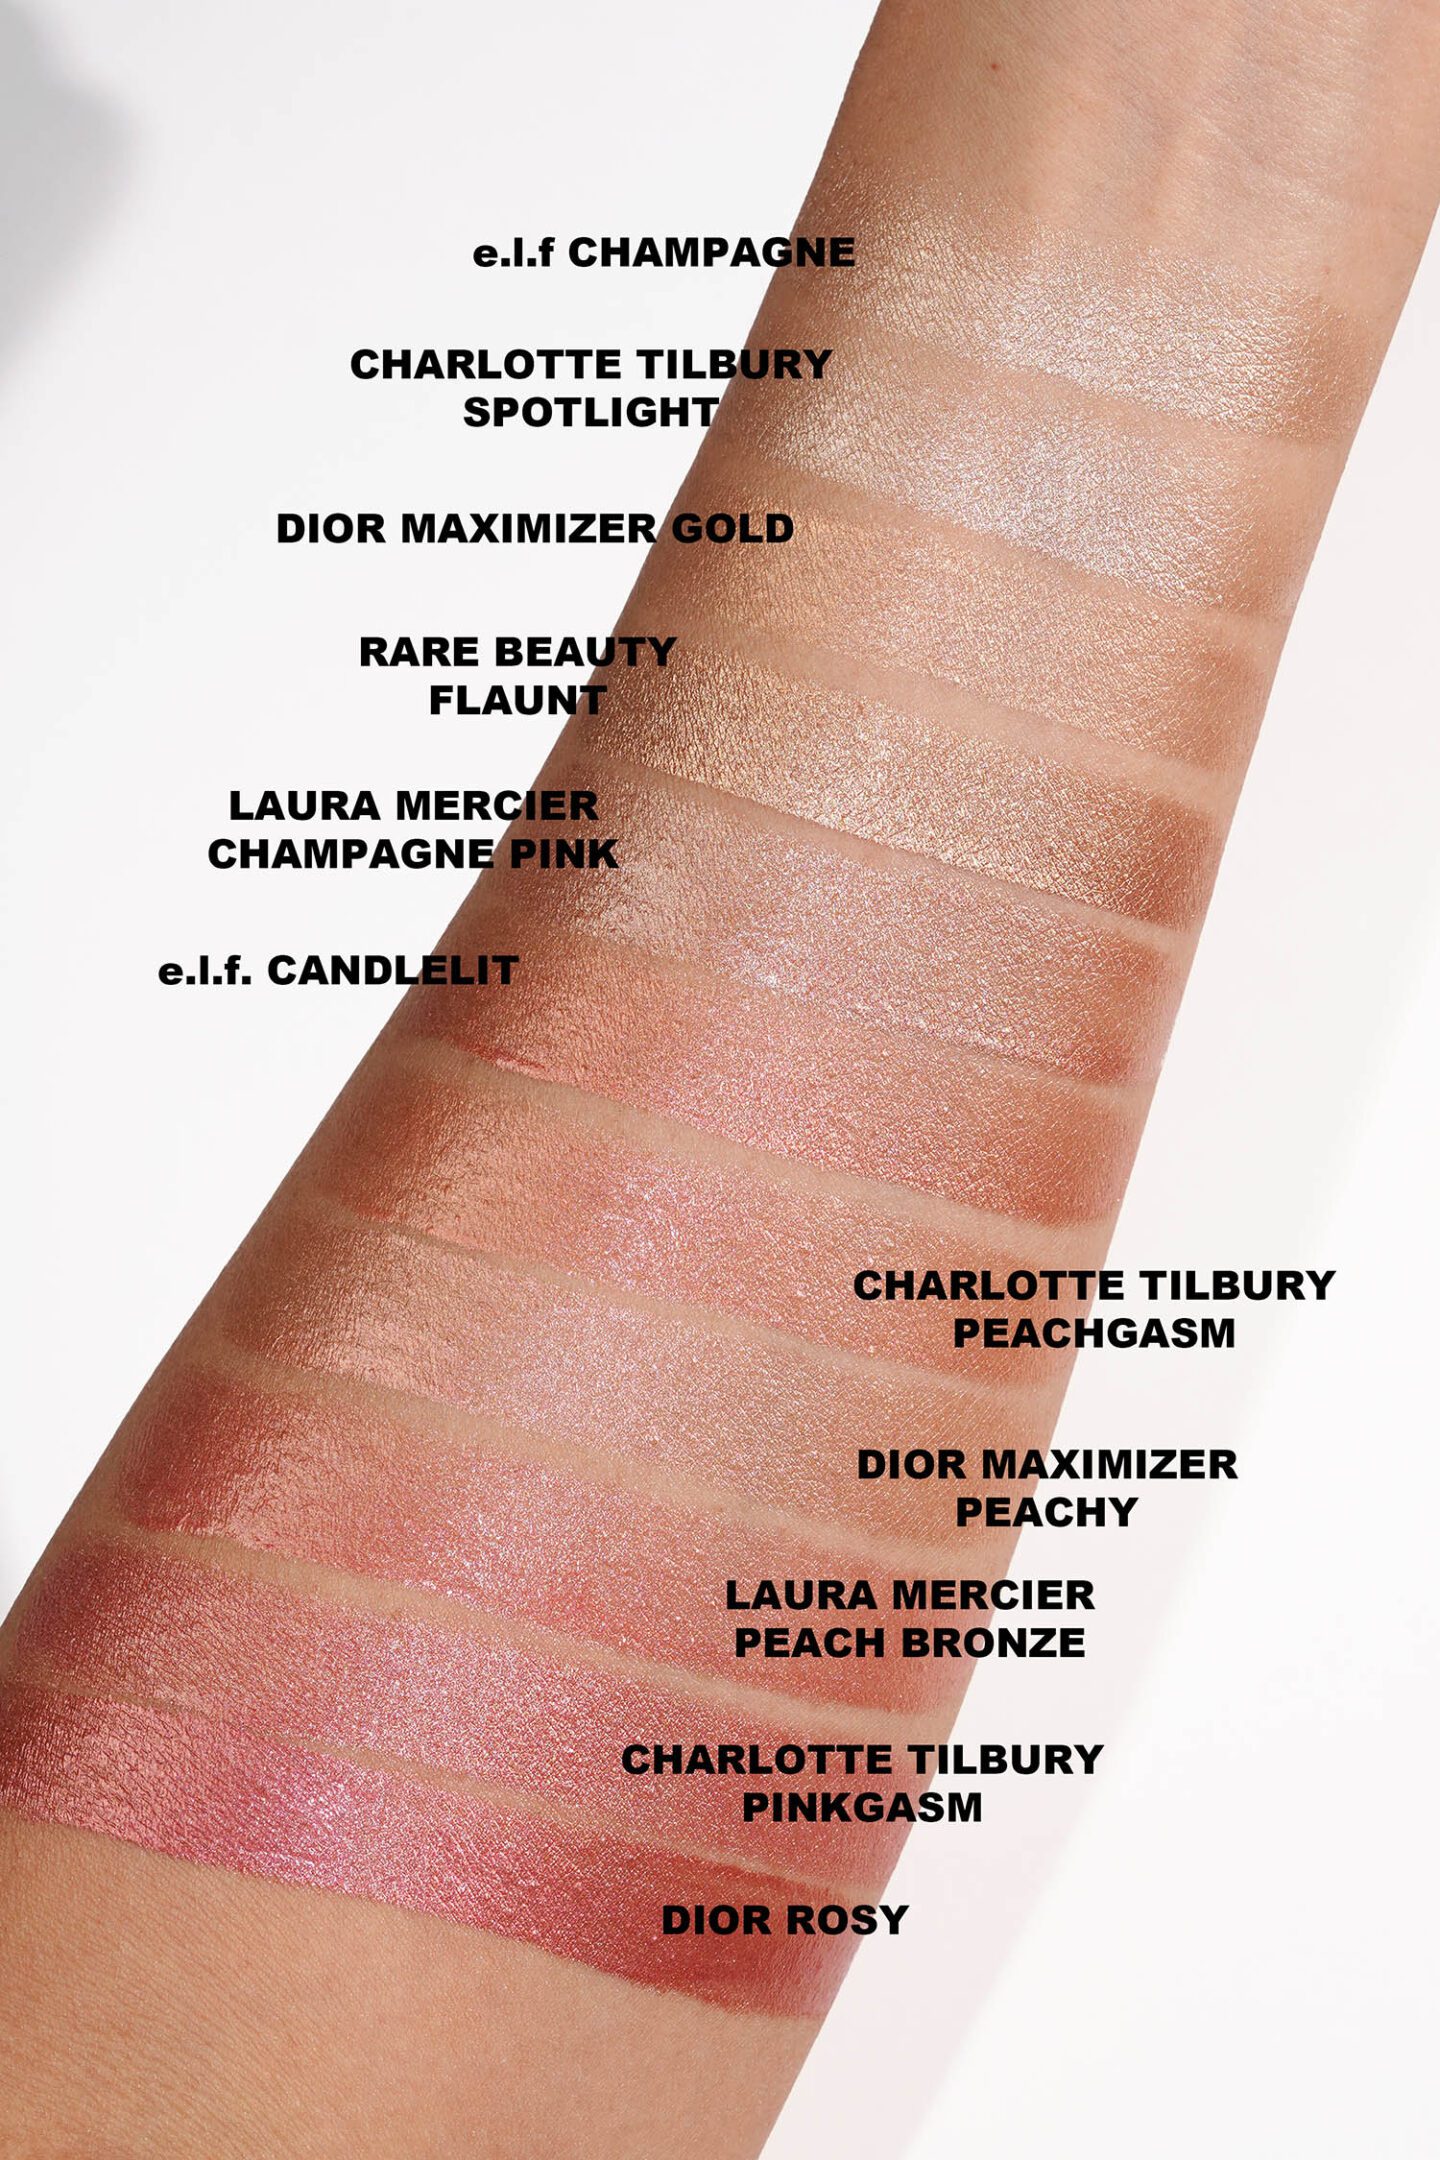 Dior Beauty Forever Glow Maximizer Gold, Peachy and Rosy swatch comparisons